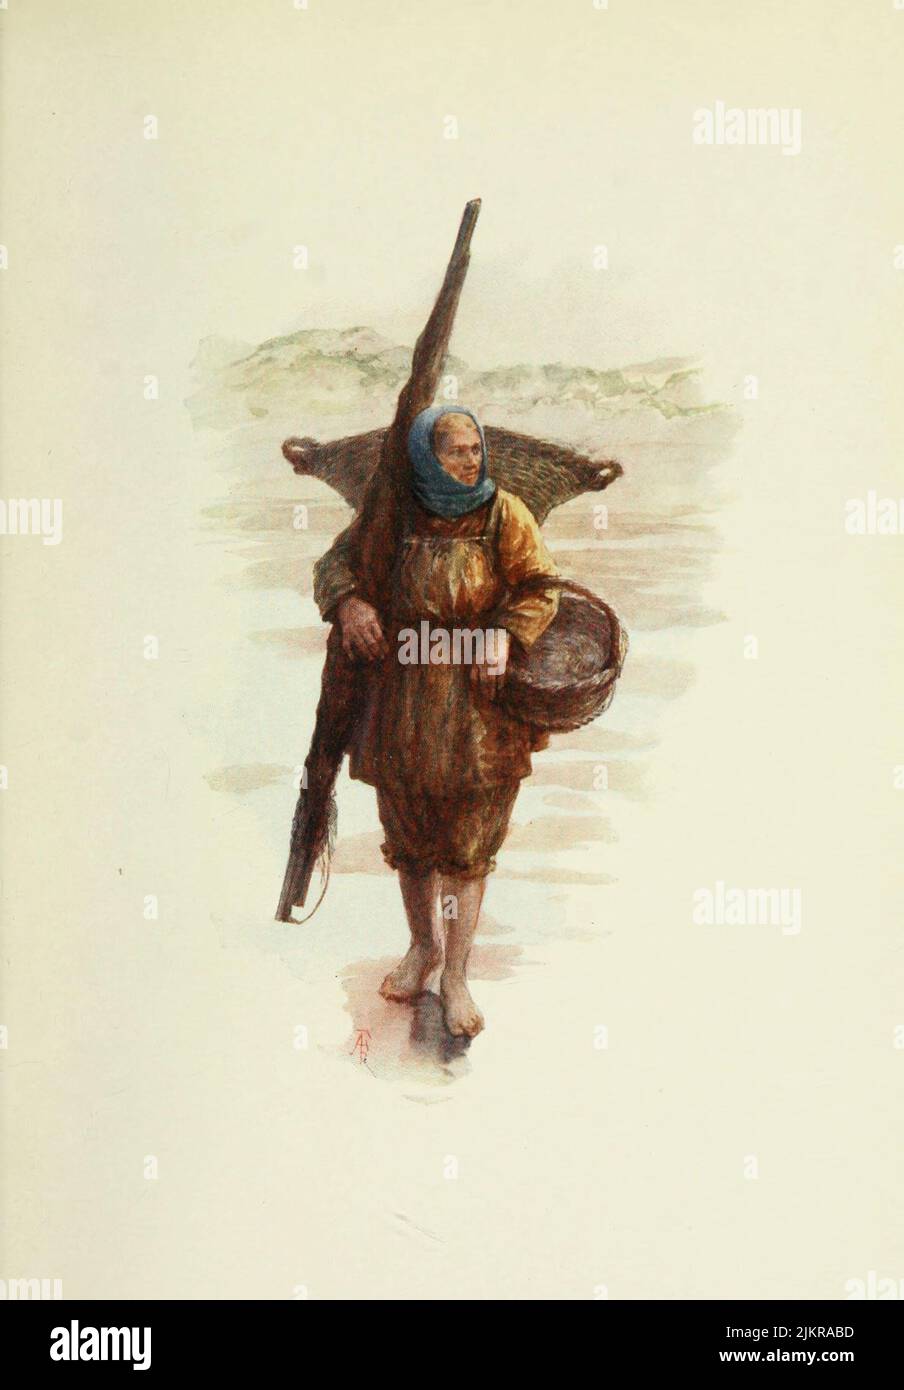 Coxyde A Shrimper Painted by Amedee Forestier, from the book '  Bruges and West Flanders ' by George William Thomson Omond, Publication date 1906 Publisher London : A. & C. Black Sir Amédée Forestier (Paris 1854 – 18 November 1930 London) was an Anglo-French artist and illustrator who specialised in historical and prehistoric scenes, and landscapes. Stock Photo